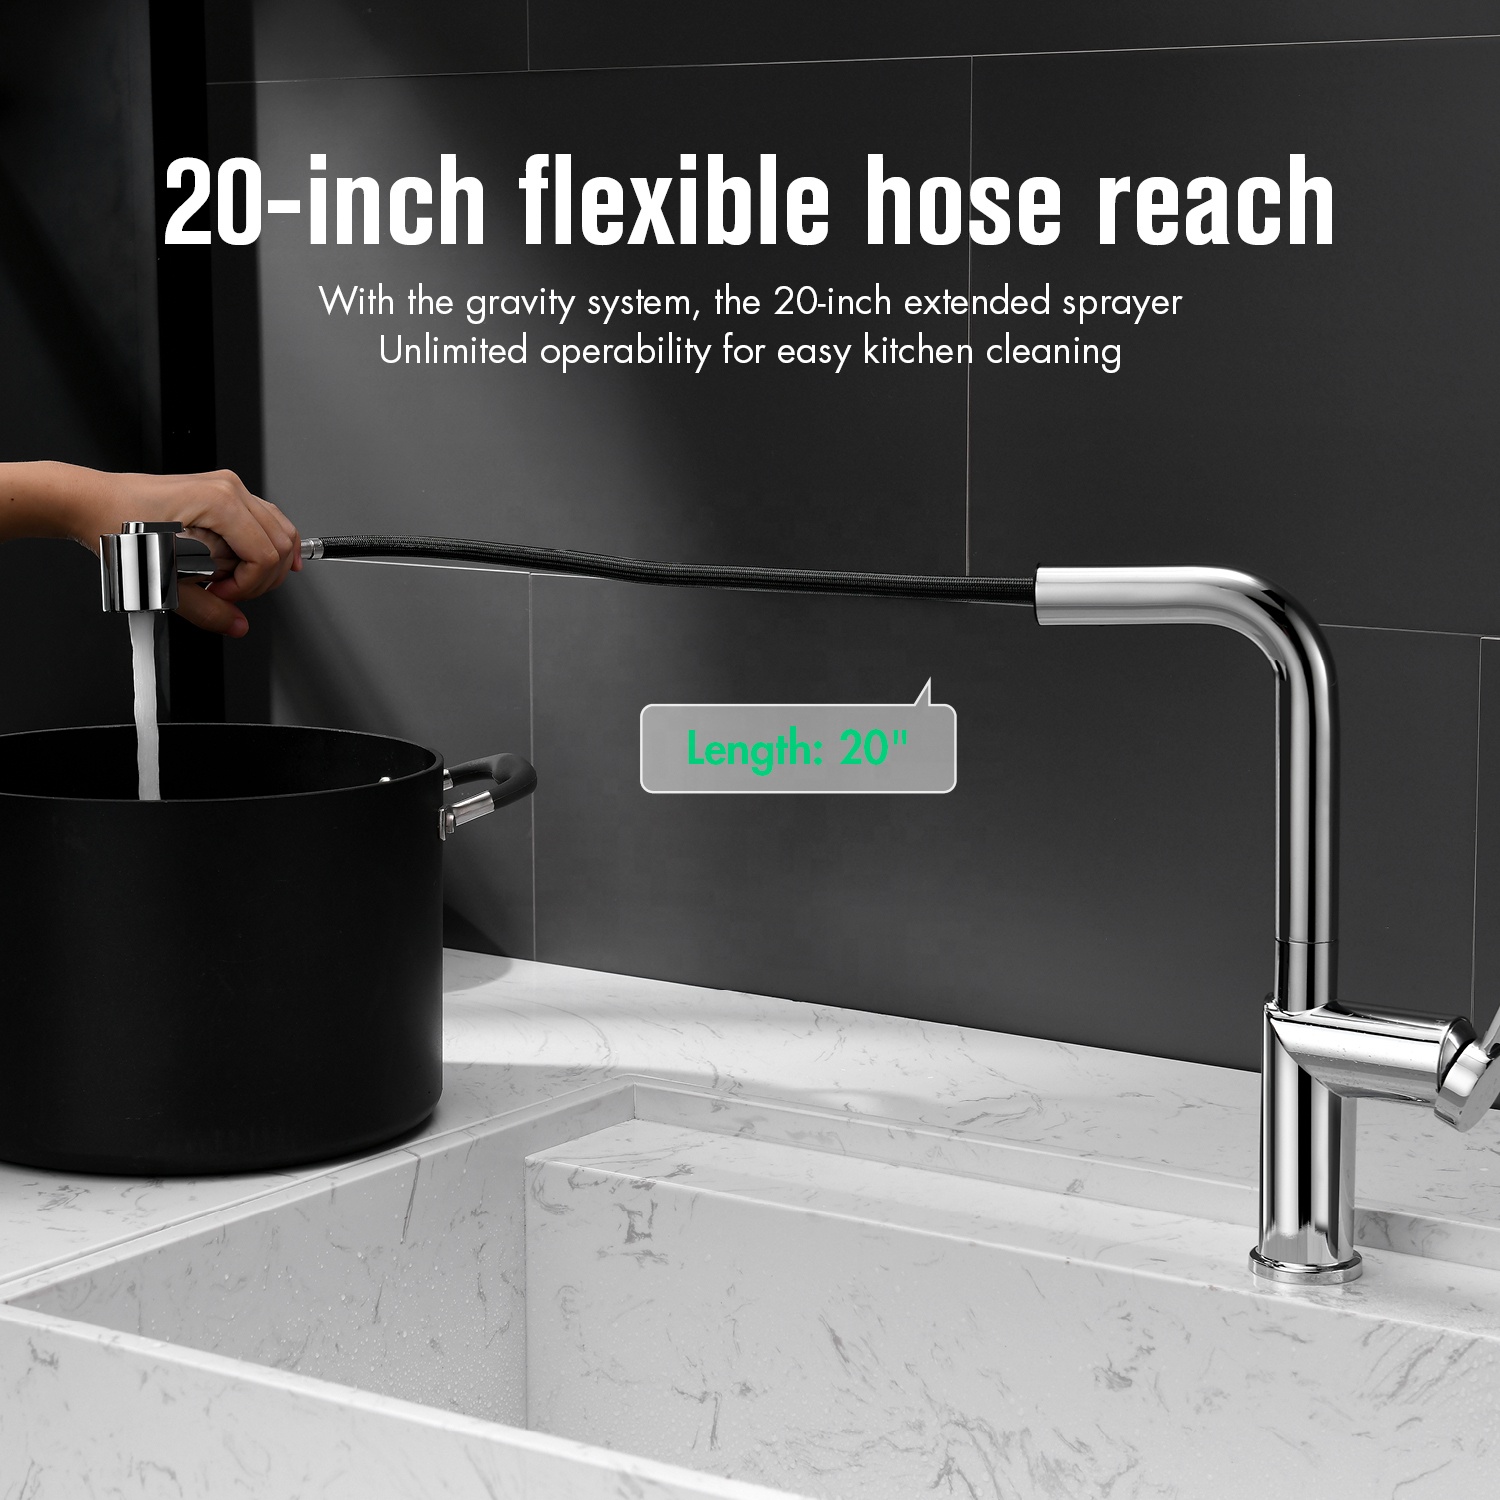 Hot Selling Steel Faucets Kaiping Kitchen Taps Sink Faucet Fashion Pull Kitchen Faucet